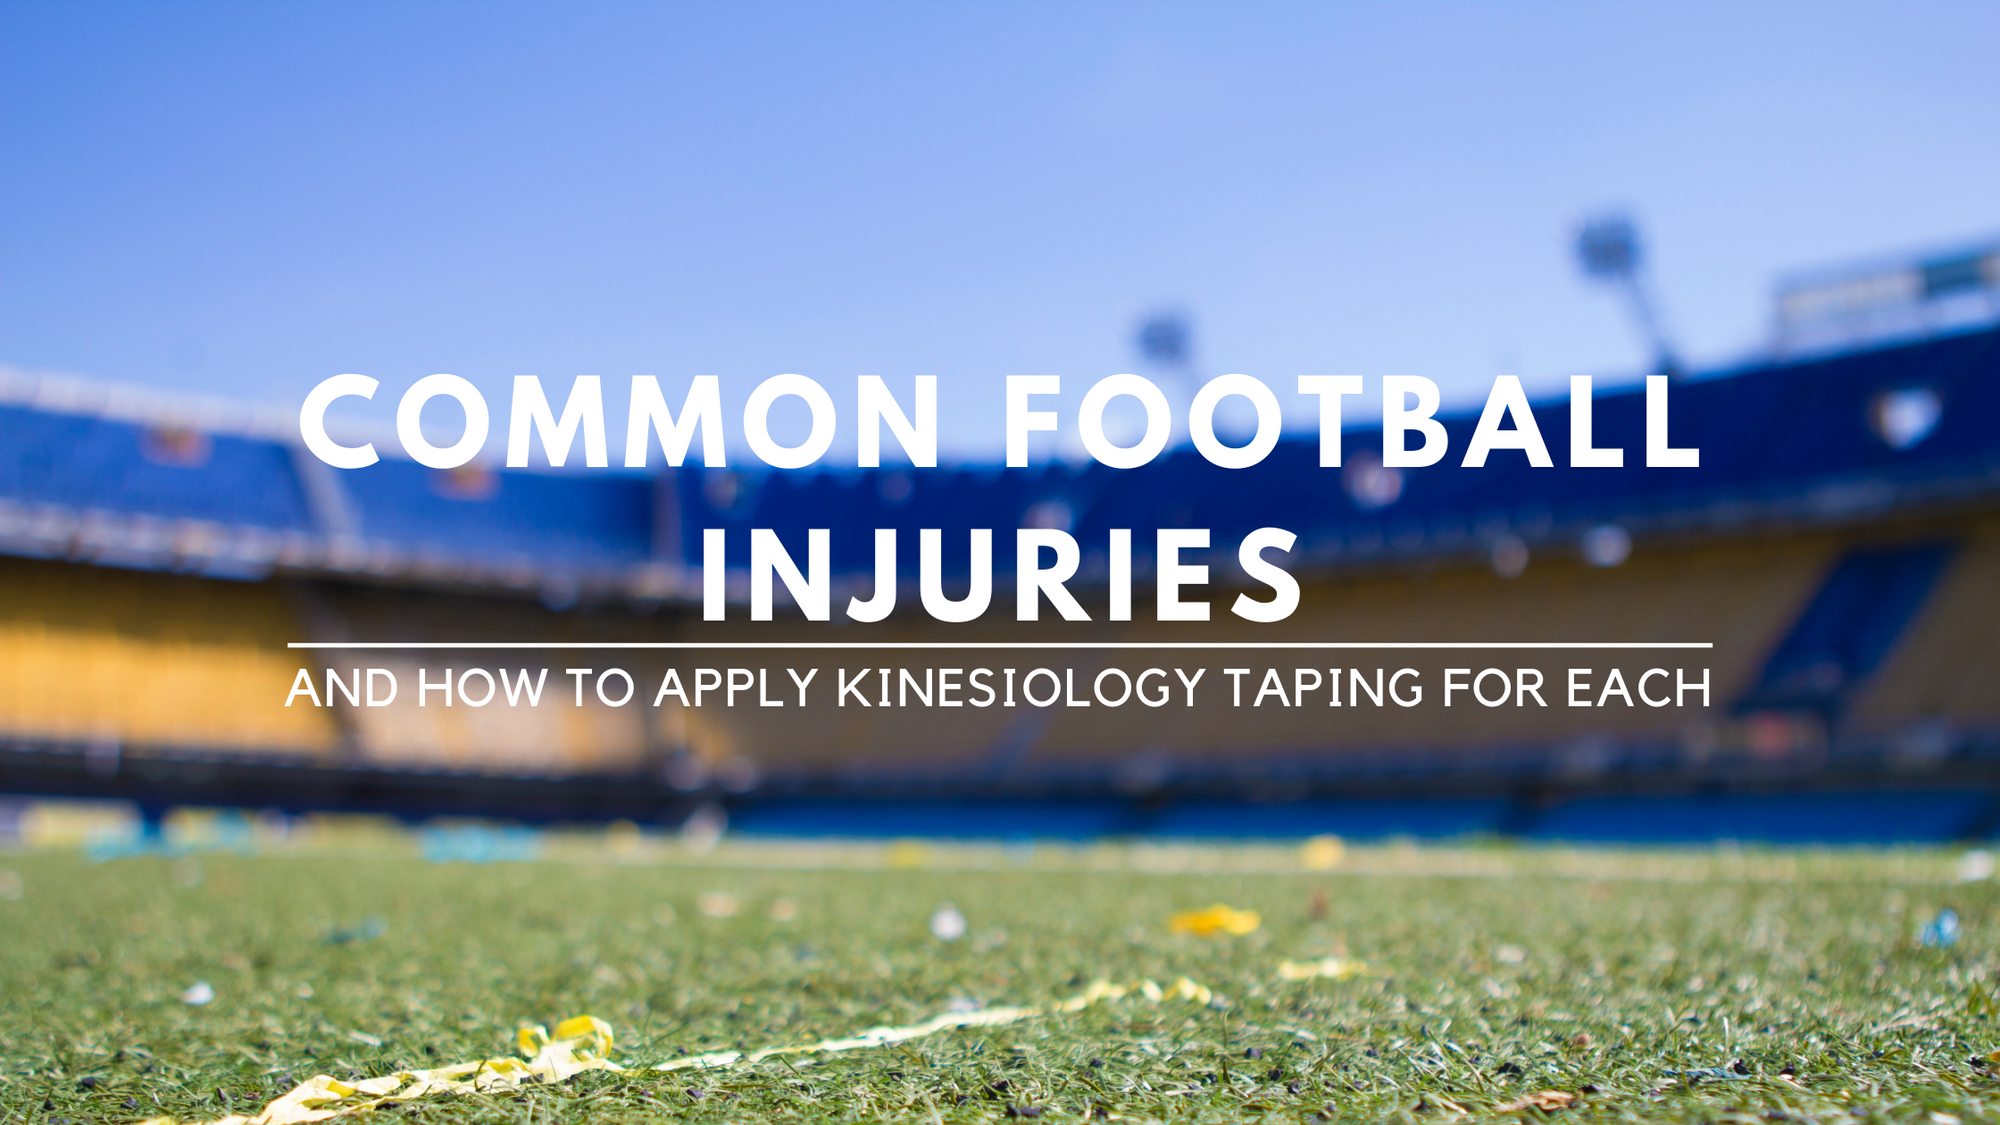 COMMON FOOTBALL INJURIES